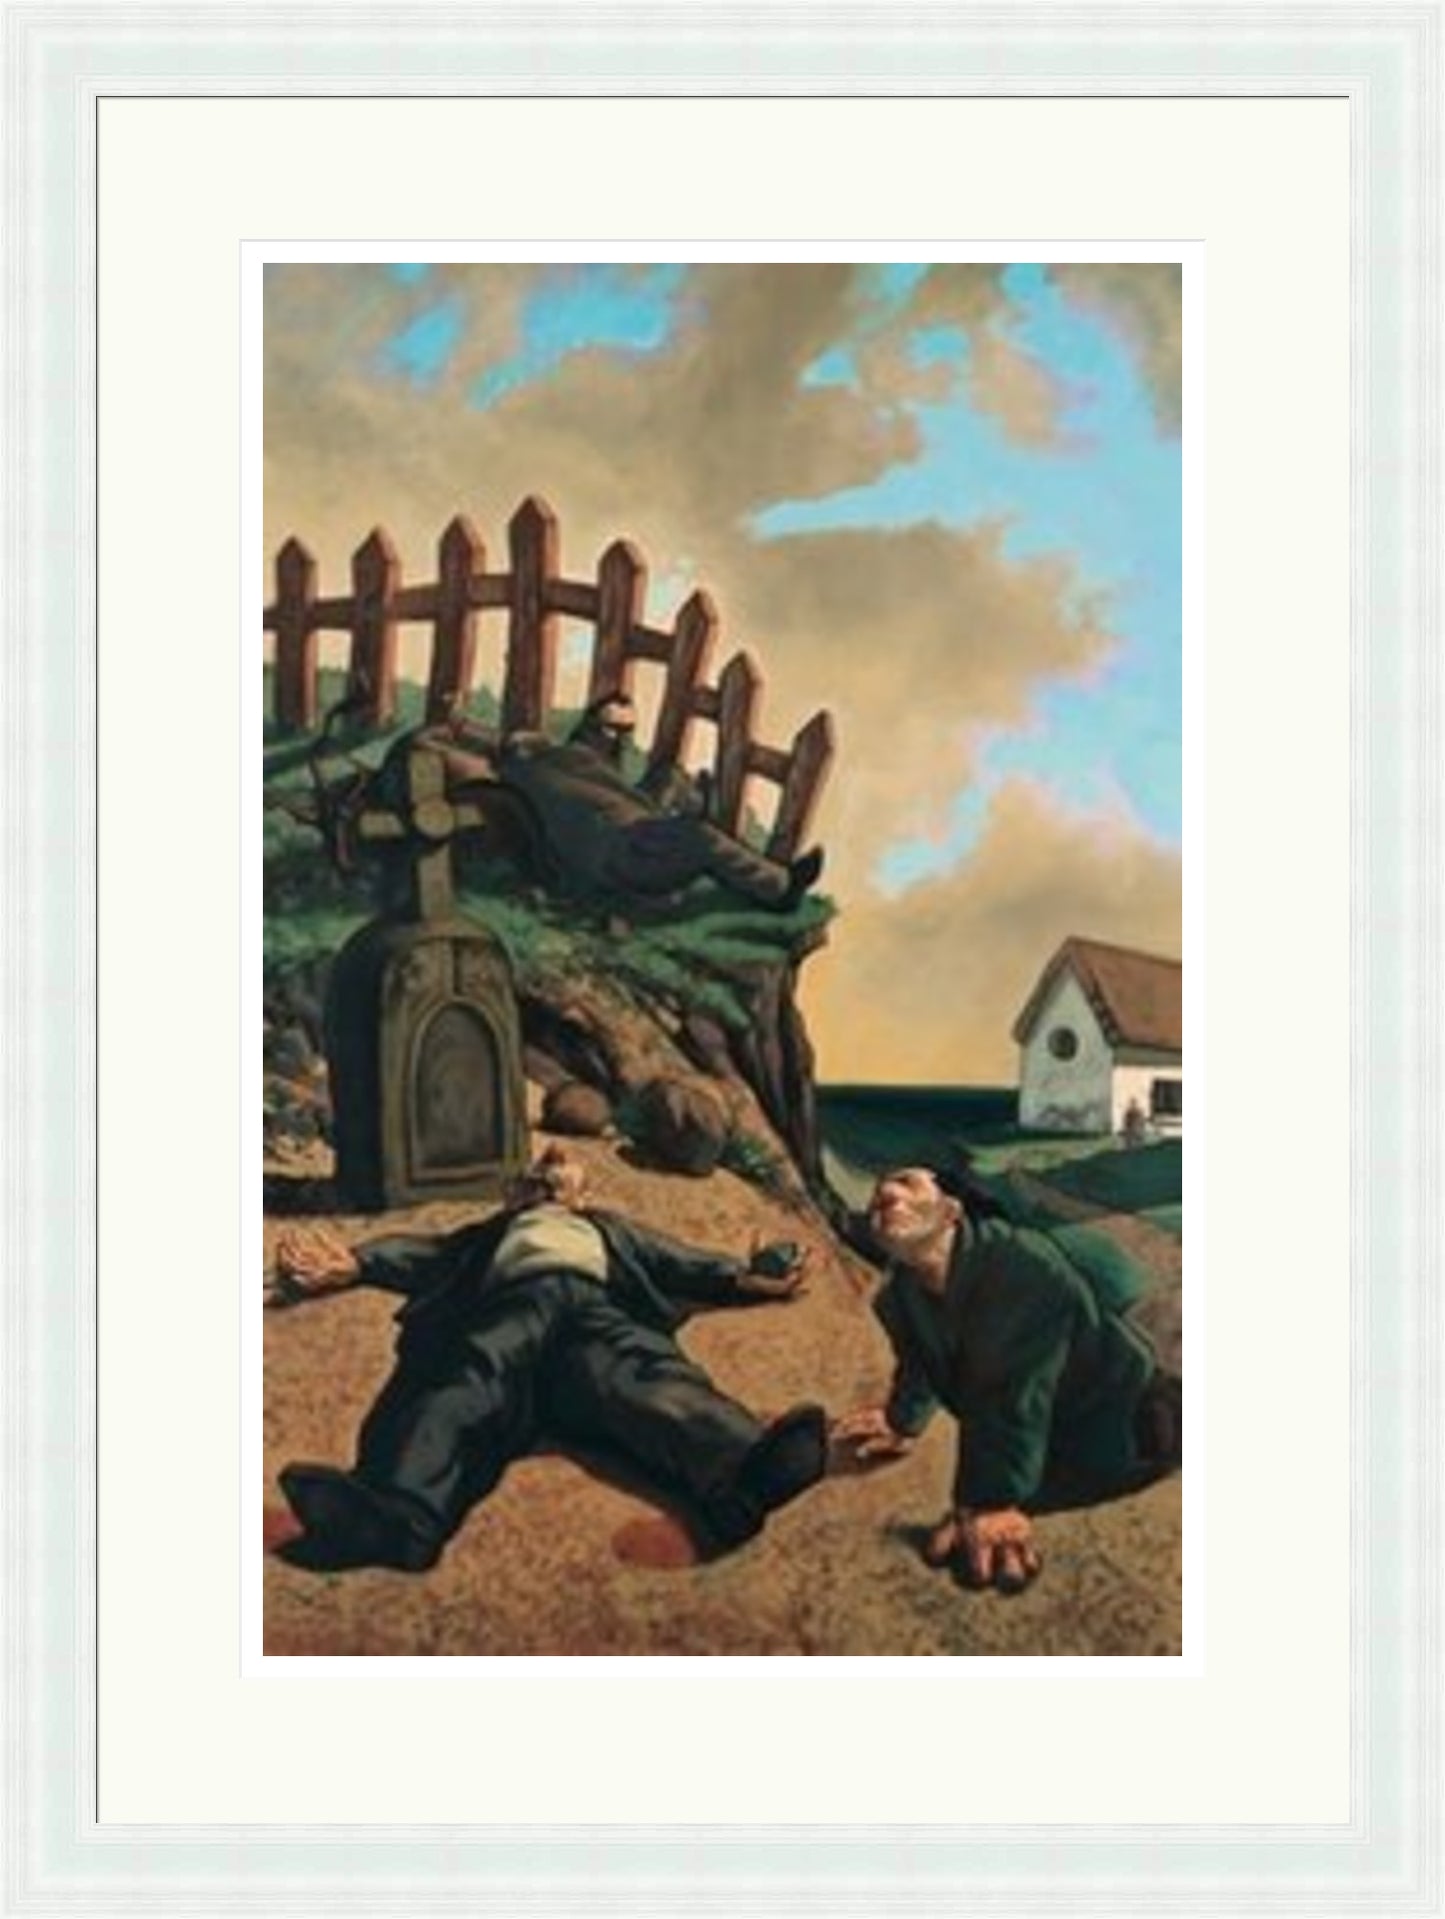 The Drunken Priest by Peter Howson